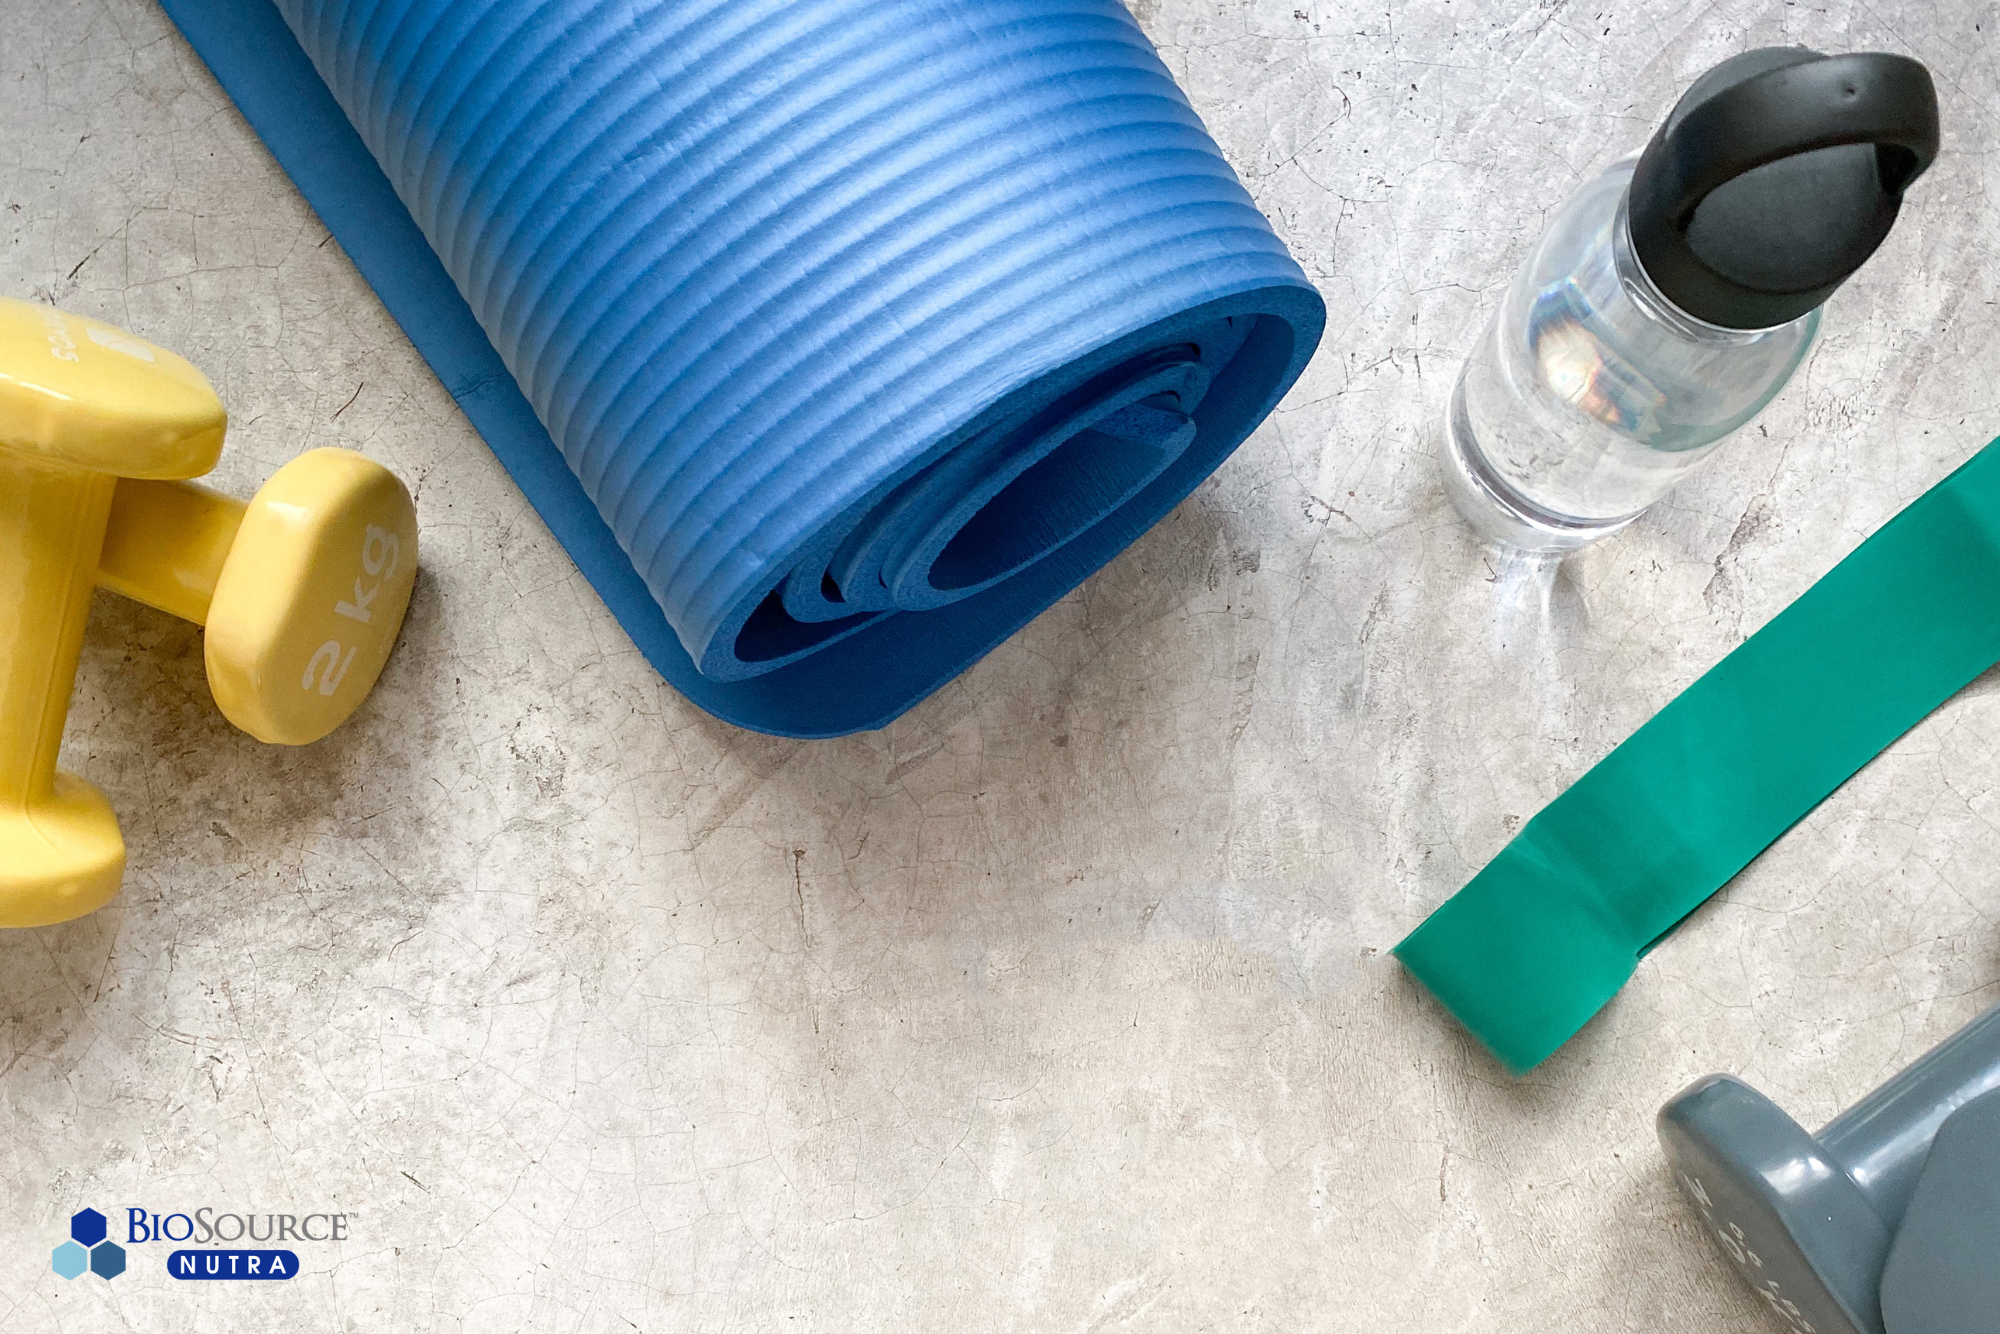 A set of weights, a yoga mat, a water bottle, and resistance bands